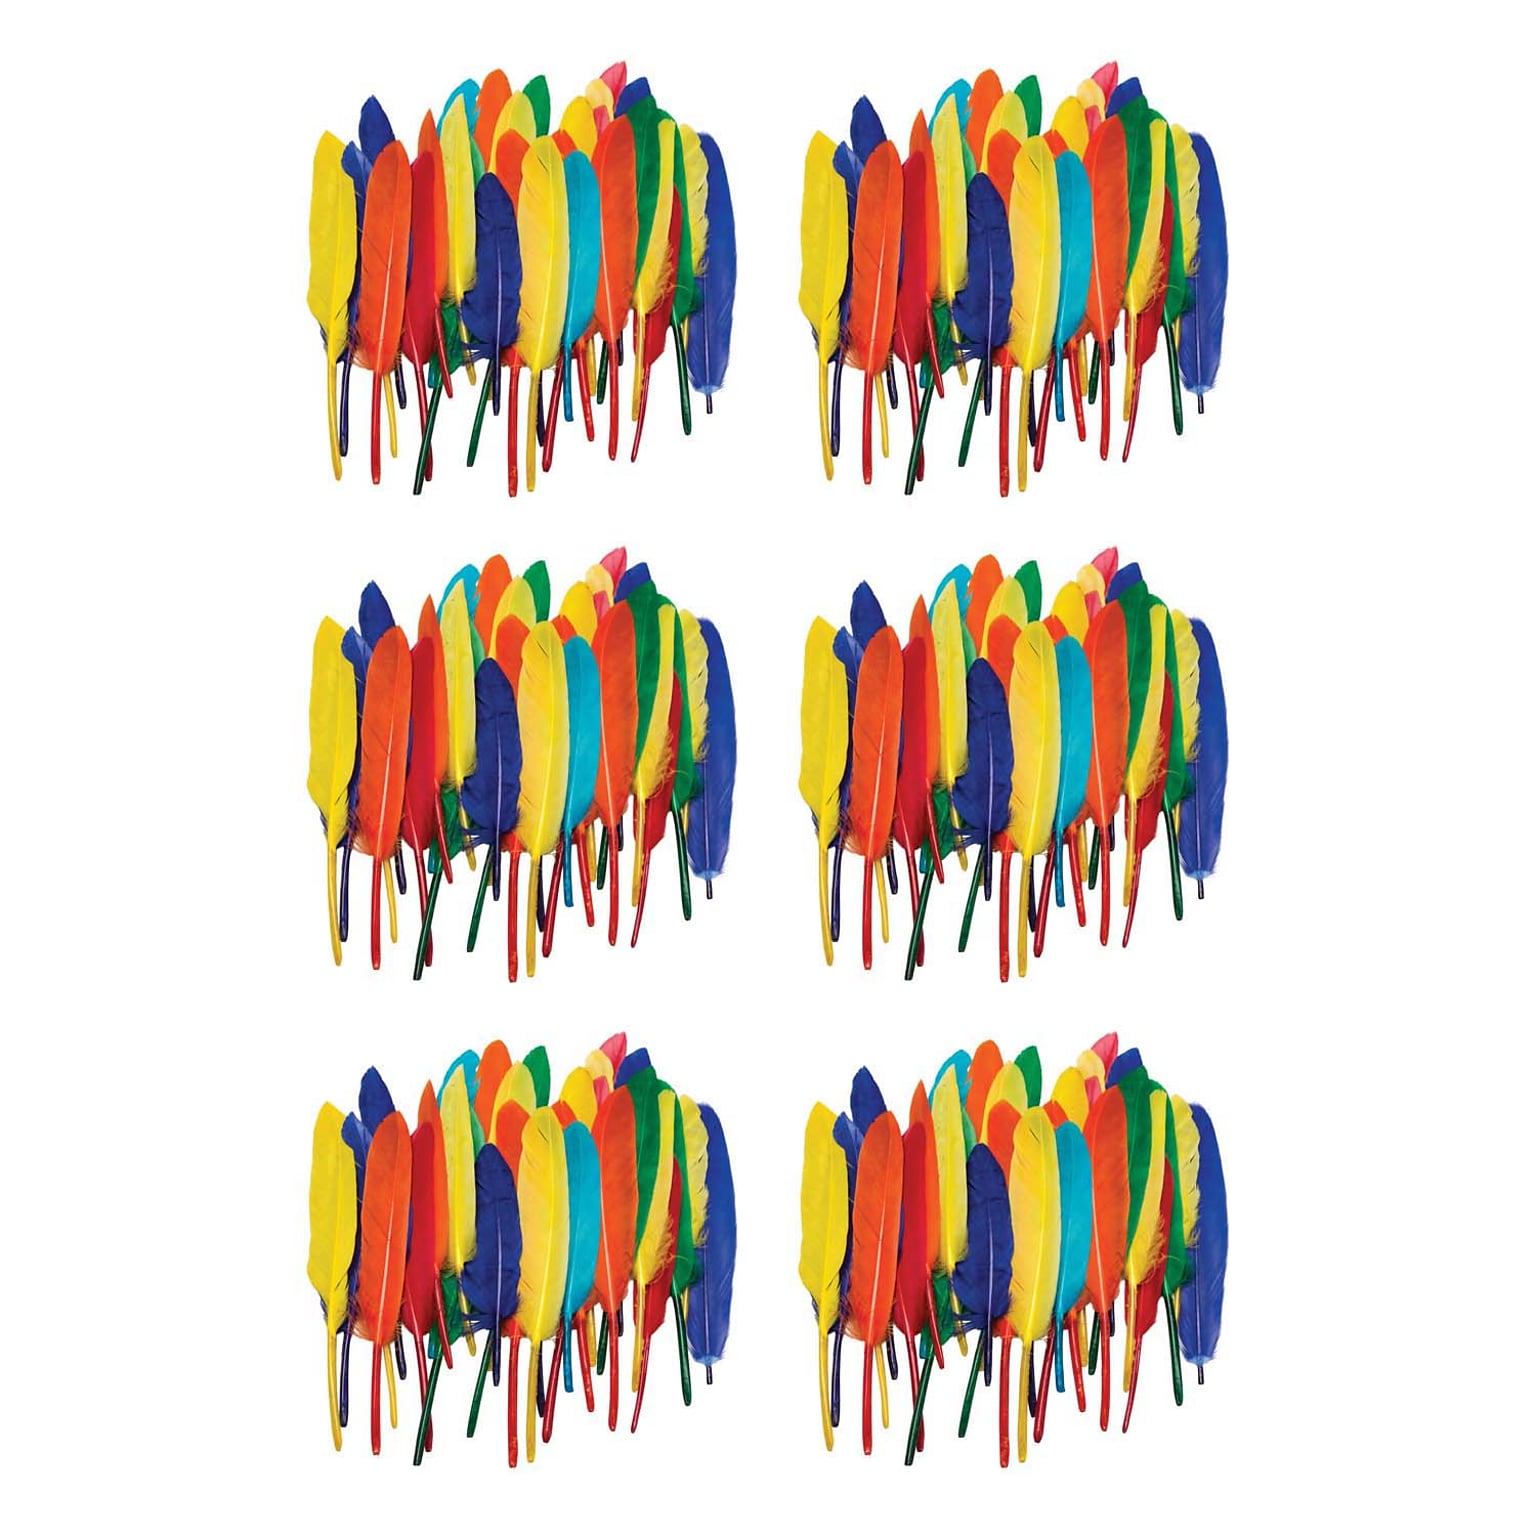 Creativity Street Duck Quills, Assorted Colors, 3 to 5, 14 grams/Pack, 6 Packs (CK-4505-6)